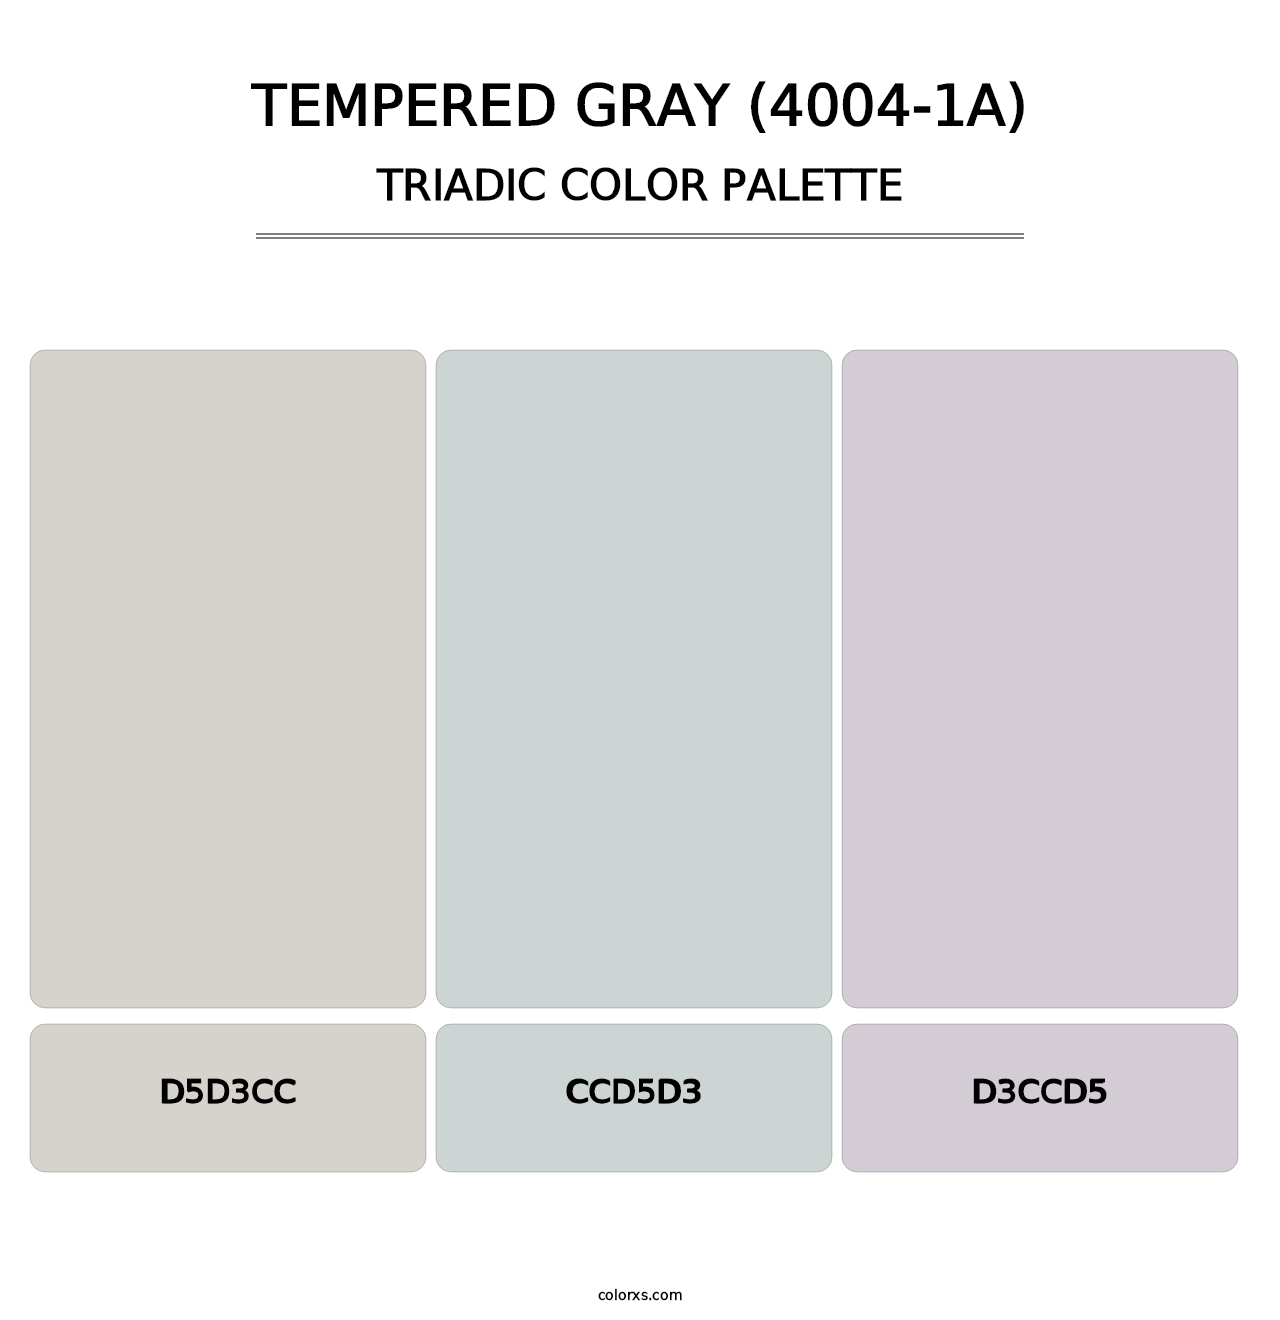 Tempered Gray (4004-1A) - Triadic Color Palette